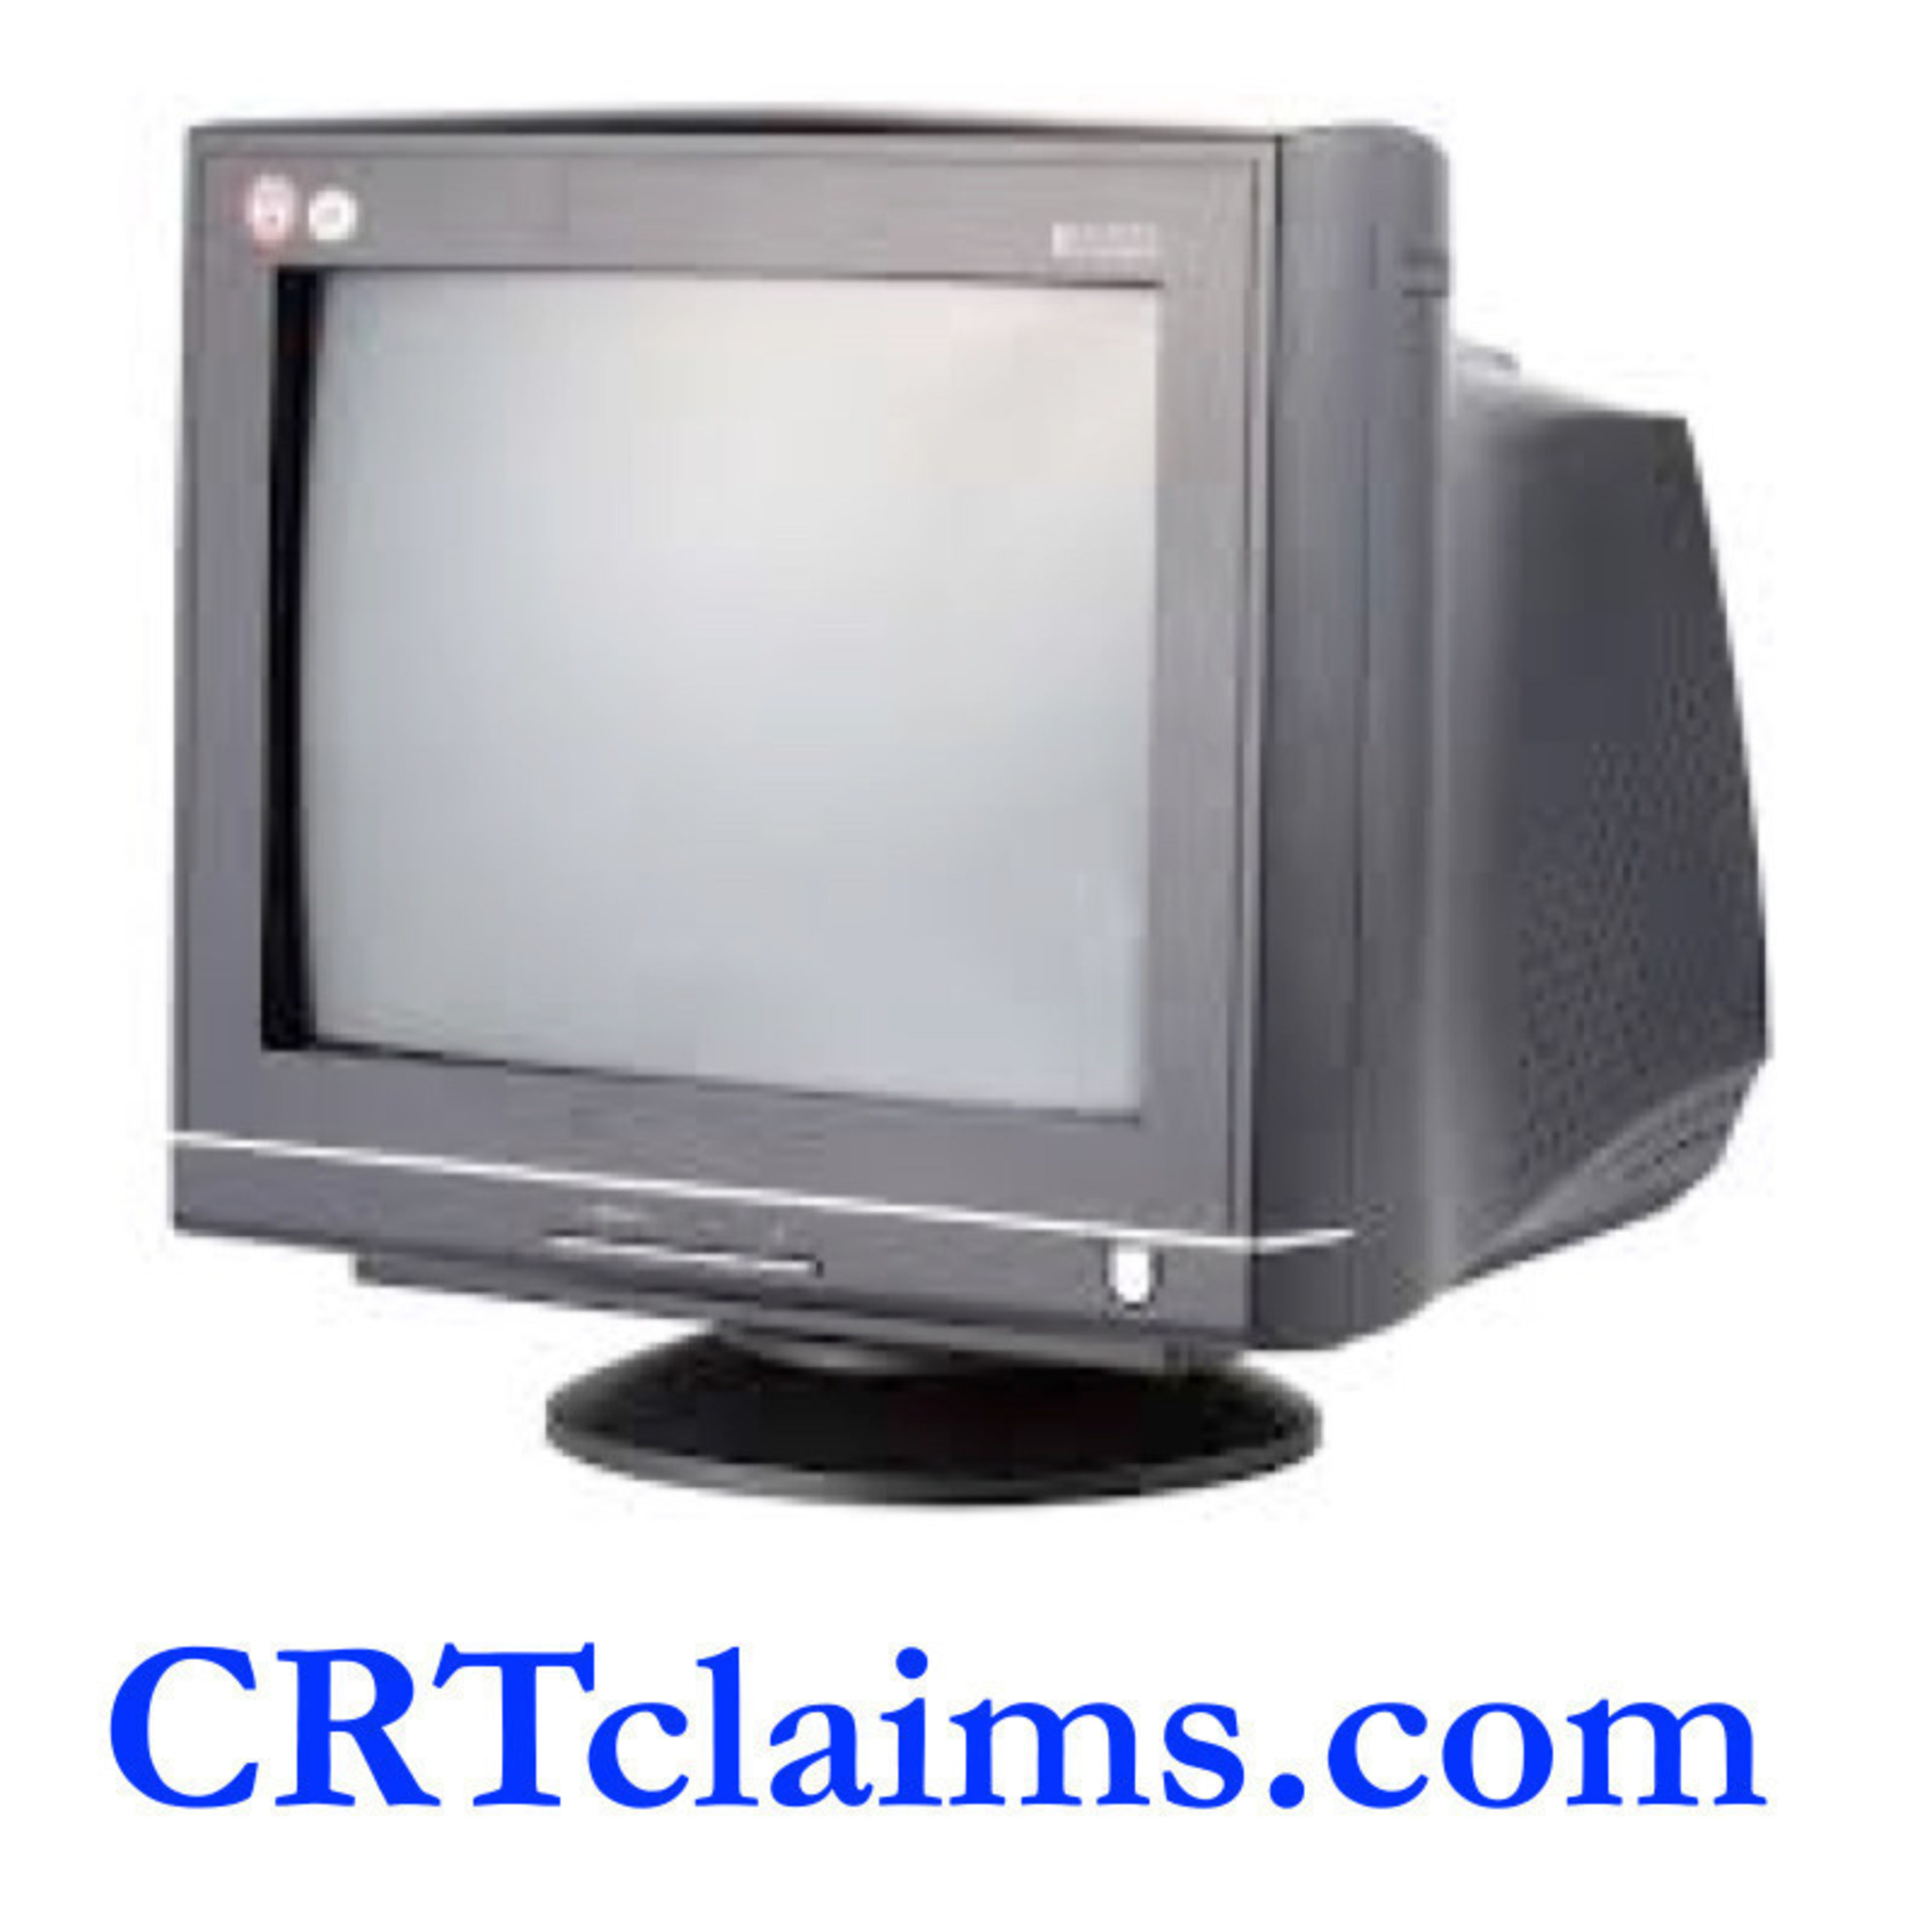 File a Claim in $576.75 Million in Settlements for CRT Purchasers. www.CRTclaims.com.